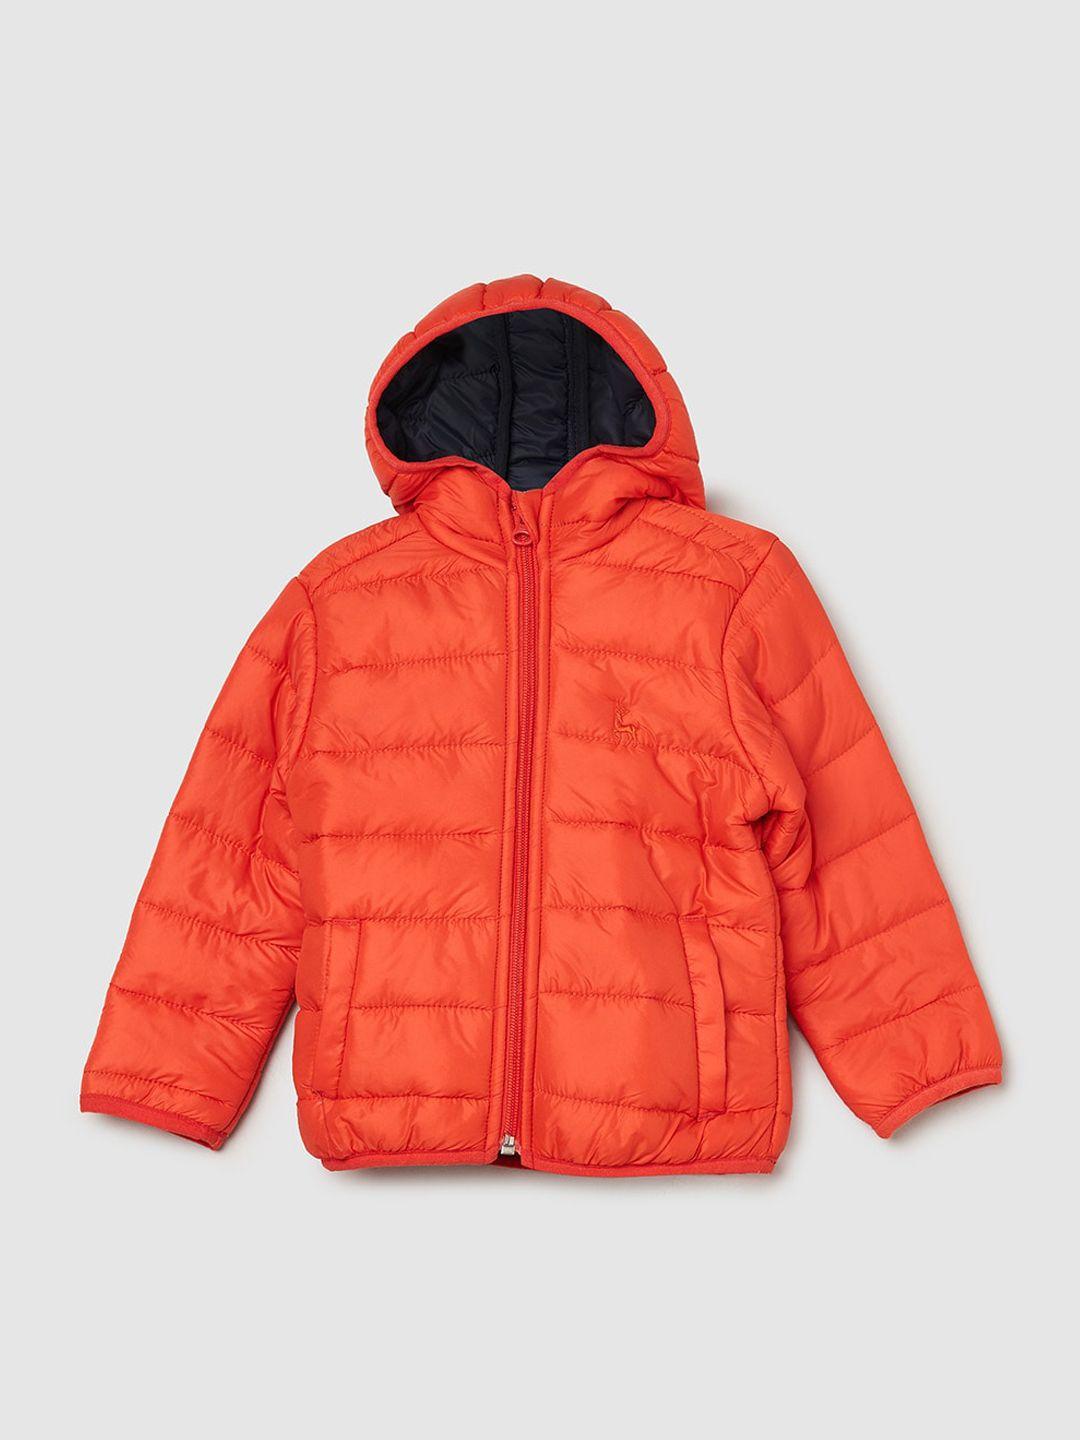 max Boys Hooded Puffer Jacket